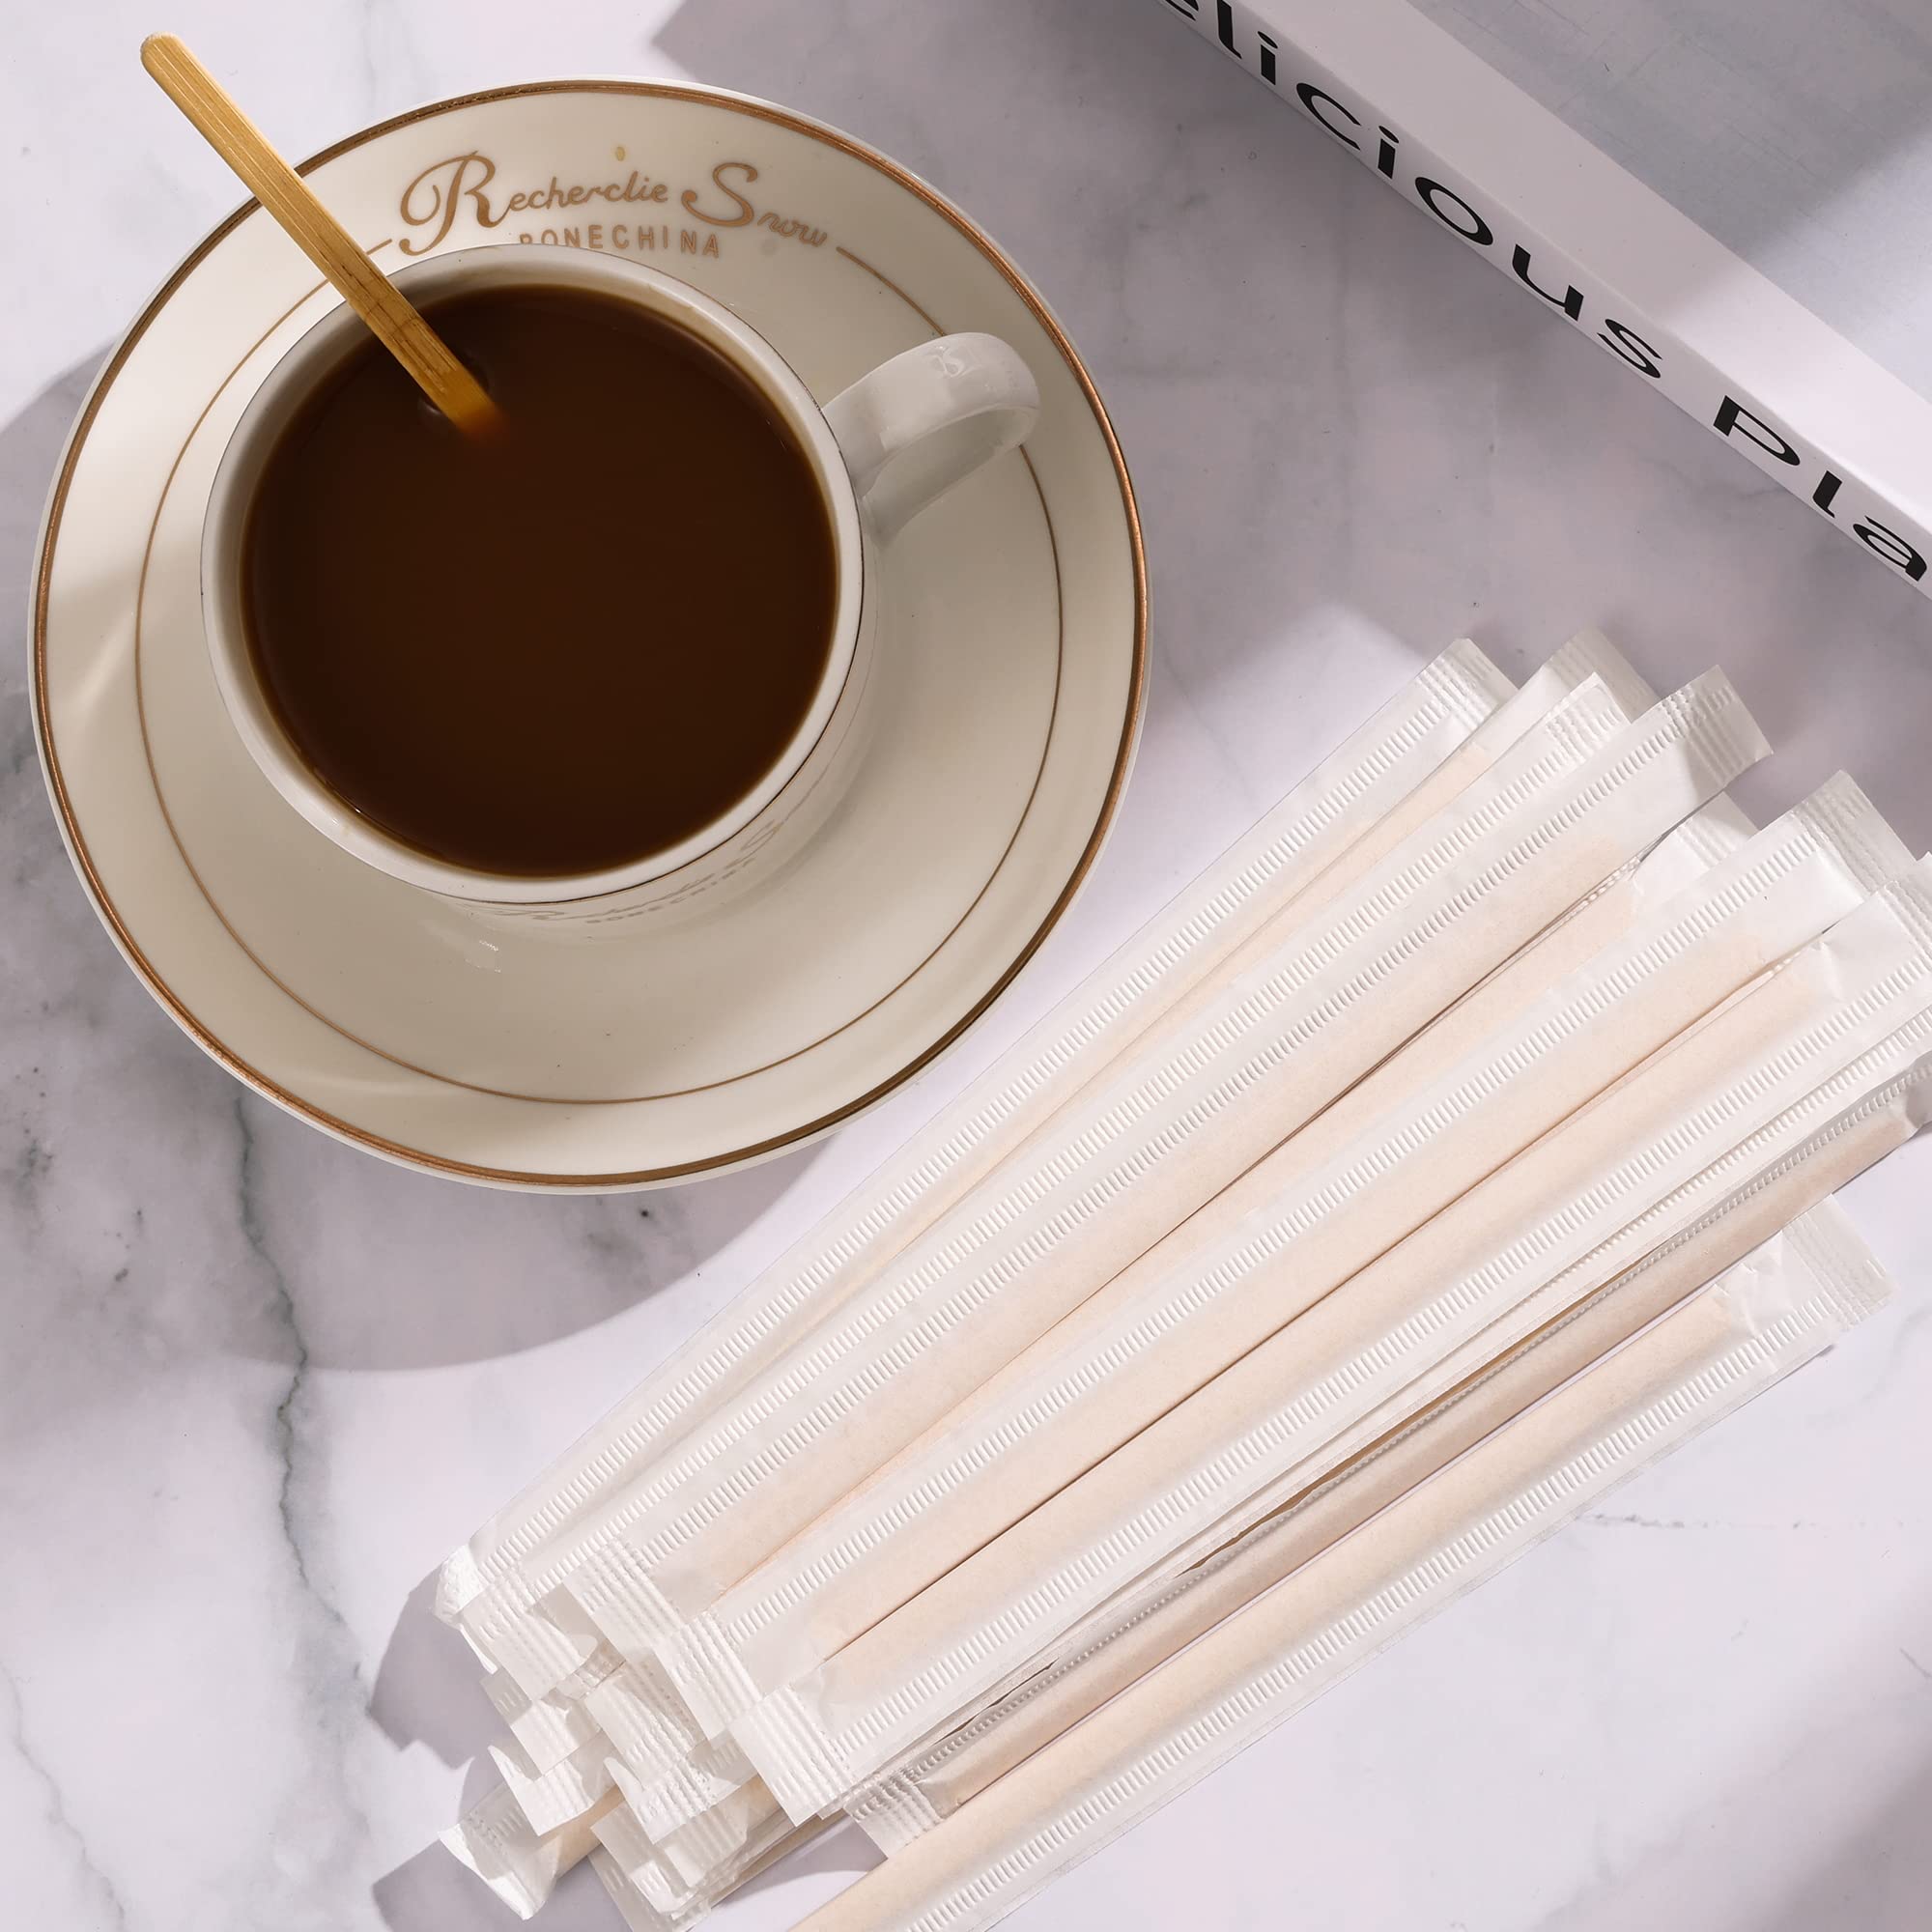 100pcs Bamboo Coffee Stirrers Individually Wrapped, 5.5 Inch Disposable Wood Swizzle Stick Beverage Mixer, Eco Friendly Long Wood Stir Sticks for Mixing Cocktail Hot Chocolate Drinking Tea